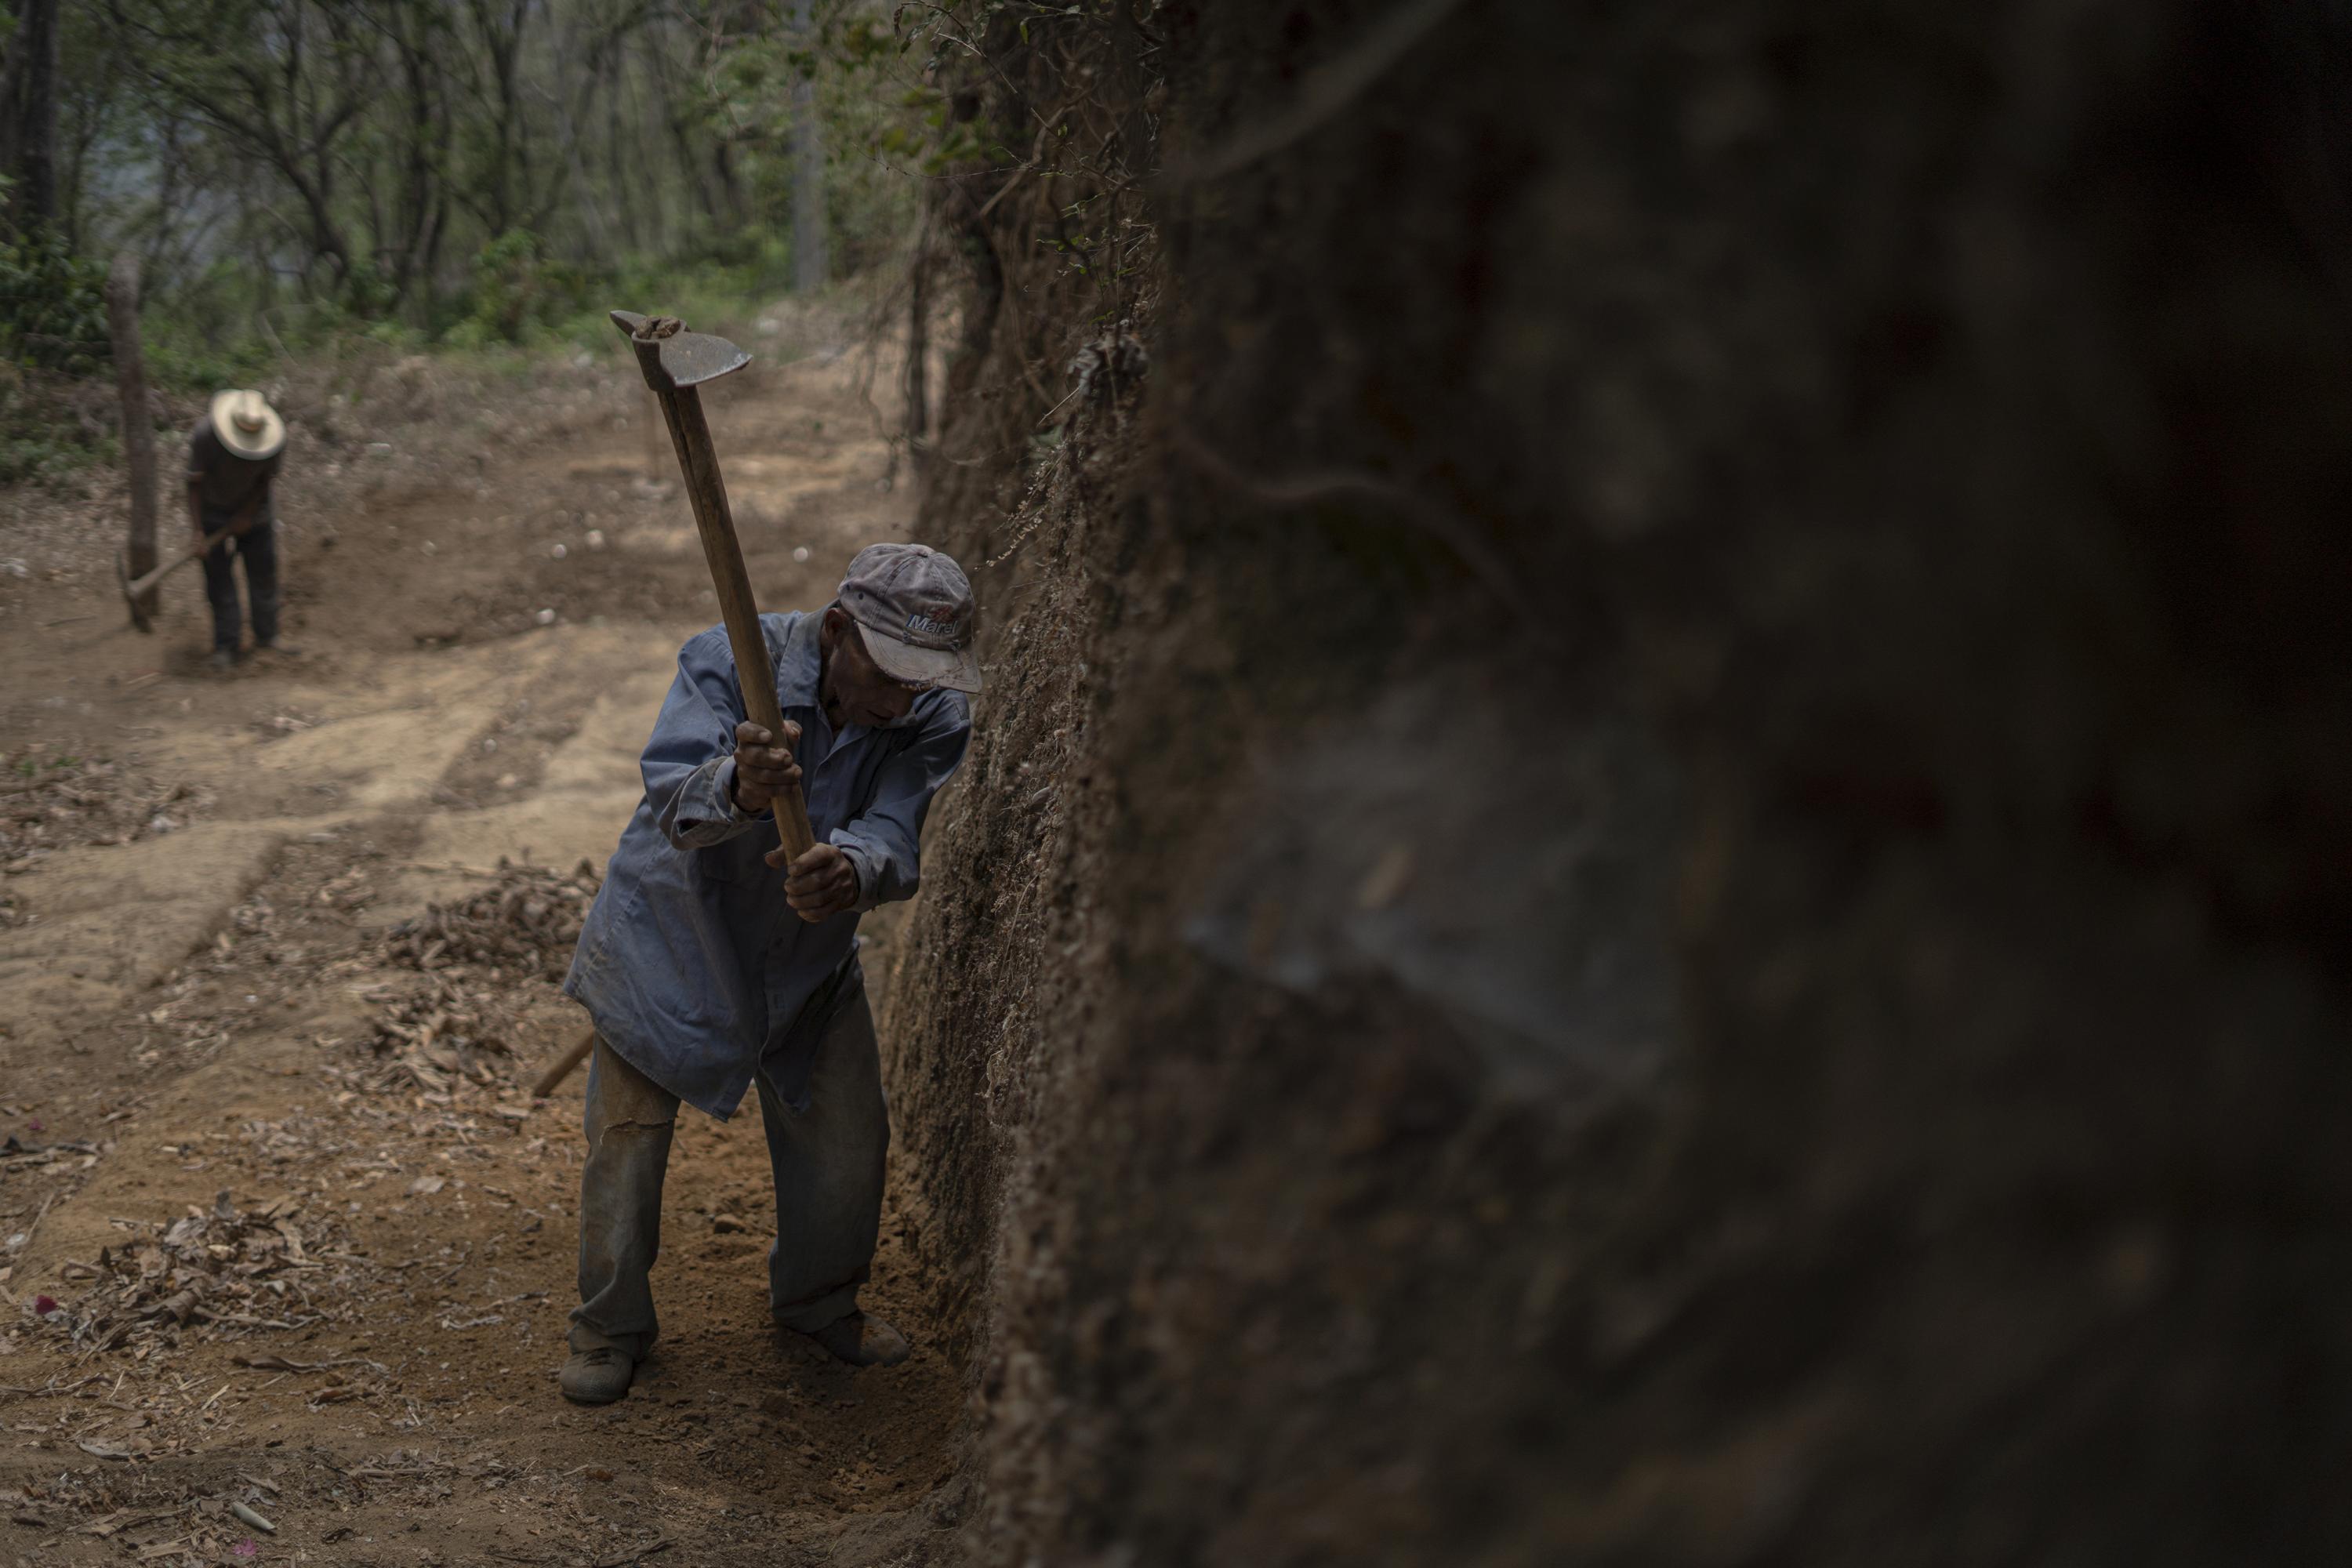 Vicente Mendoza, 78, pictured in the background, and Juan García Saldaña, 72, repair one of the roads leading to the community of El Jícaro Centro, in the municipality of Tacuba. Both work as volunteers, spending long hours swinging pickaxes and moving dirt with shovels to prevent the rain from flooding the road. Vicente was once a leader in the community, helping to manage the area’s electrical infrastructure projects. Now, he contributes as much as his age will allow. “I always watch Channel 10,” Vicente says, referring to the government-run television station. “All they ever talk about are wonderful things, but none of those wonders ever reach us here.”